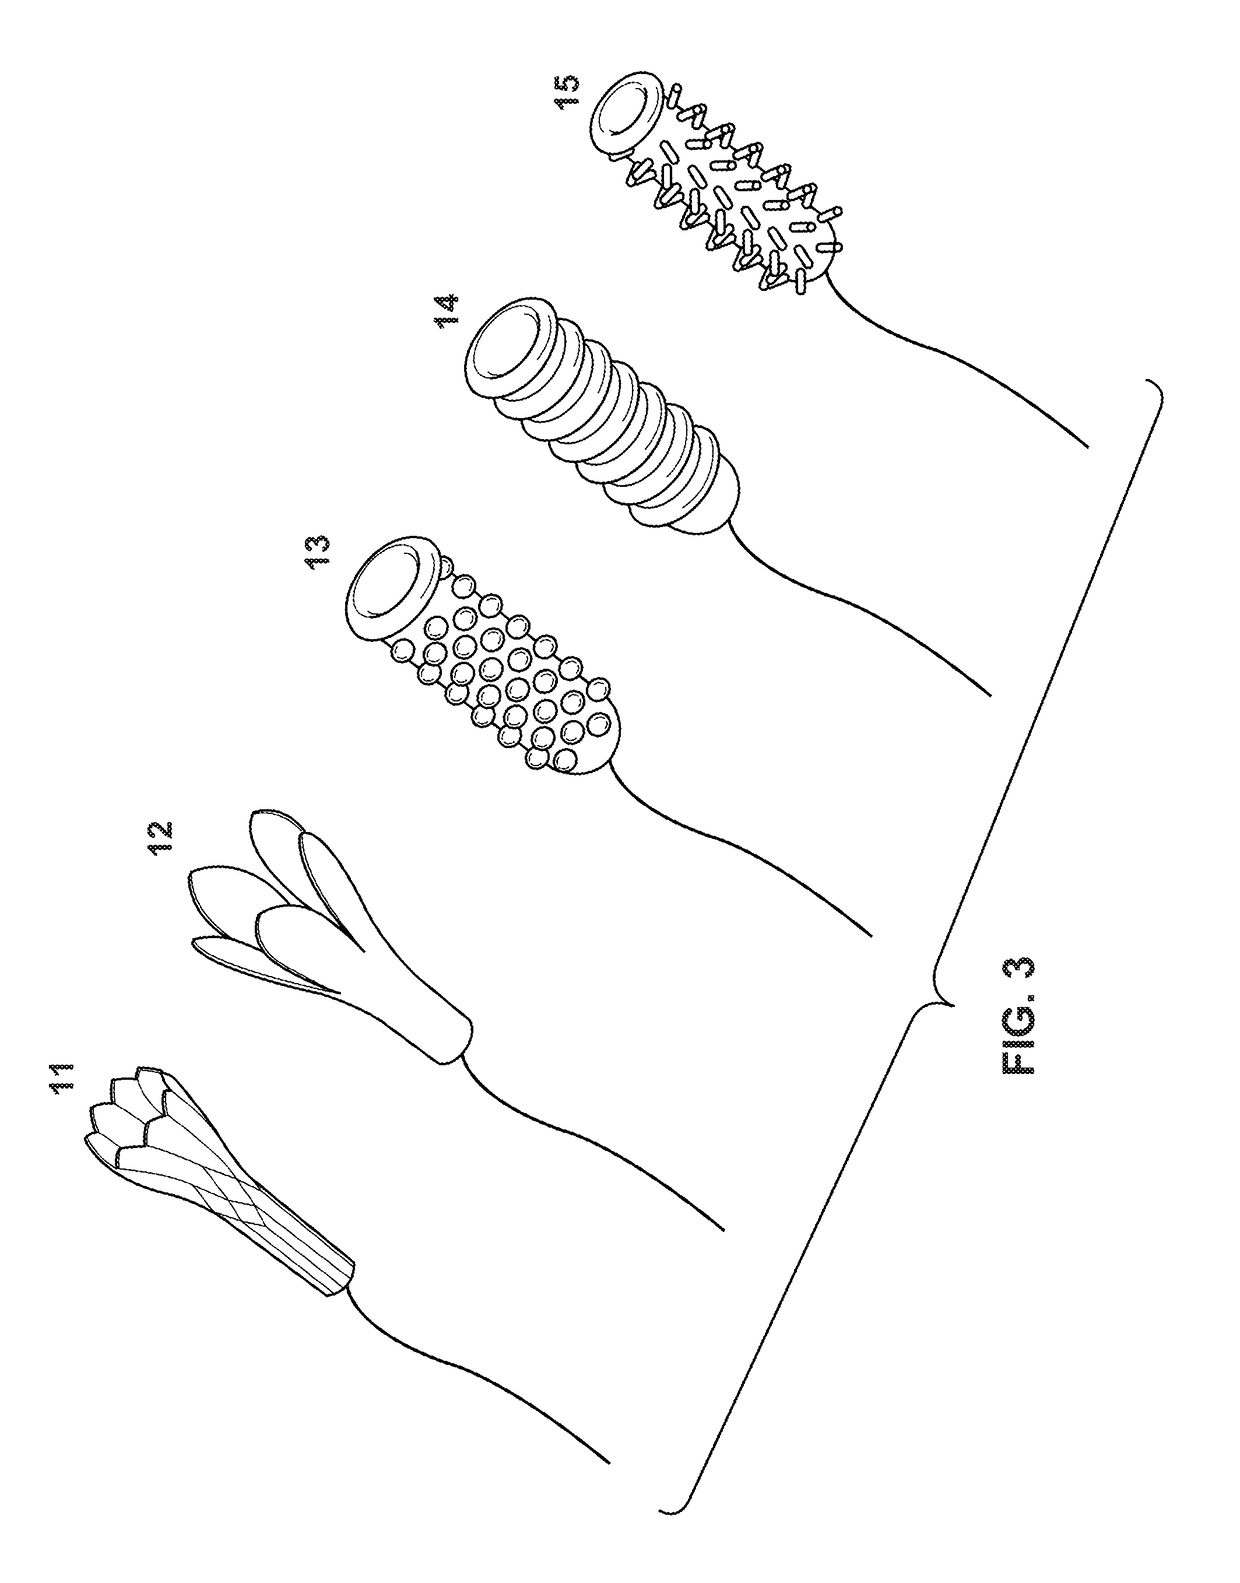 Self-collection device and kit for collecting cervical and vaginal cells